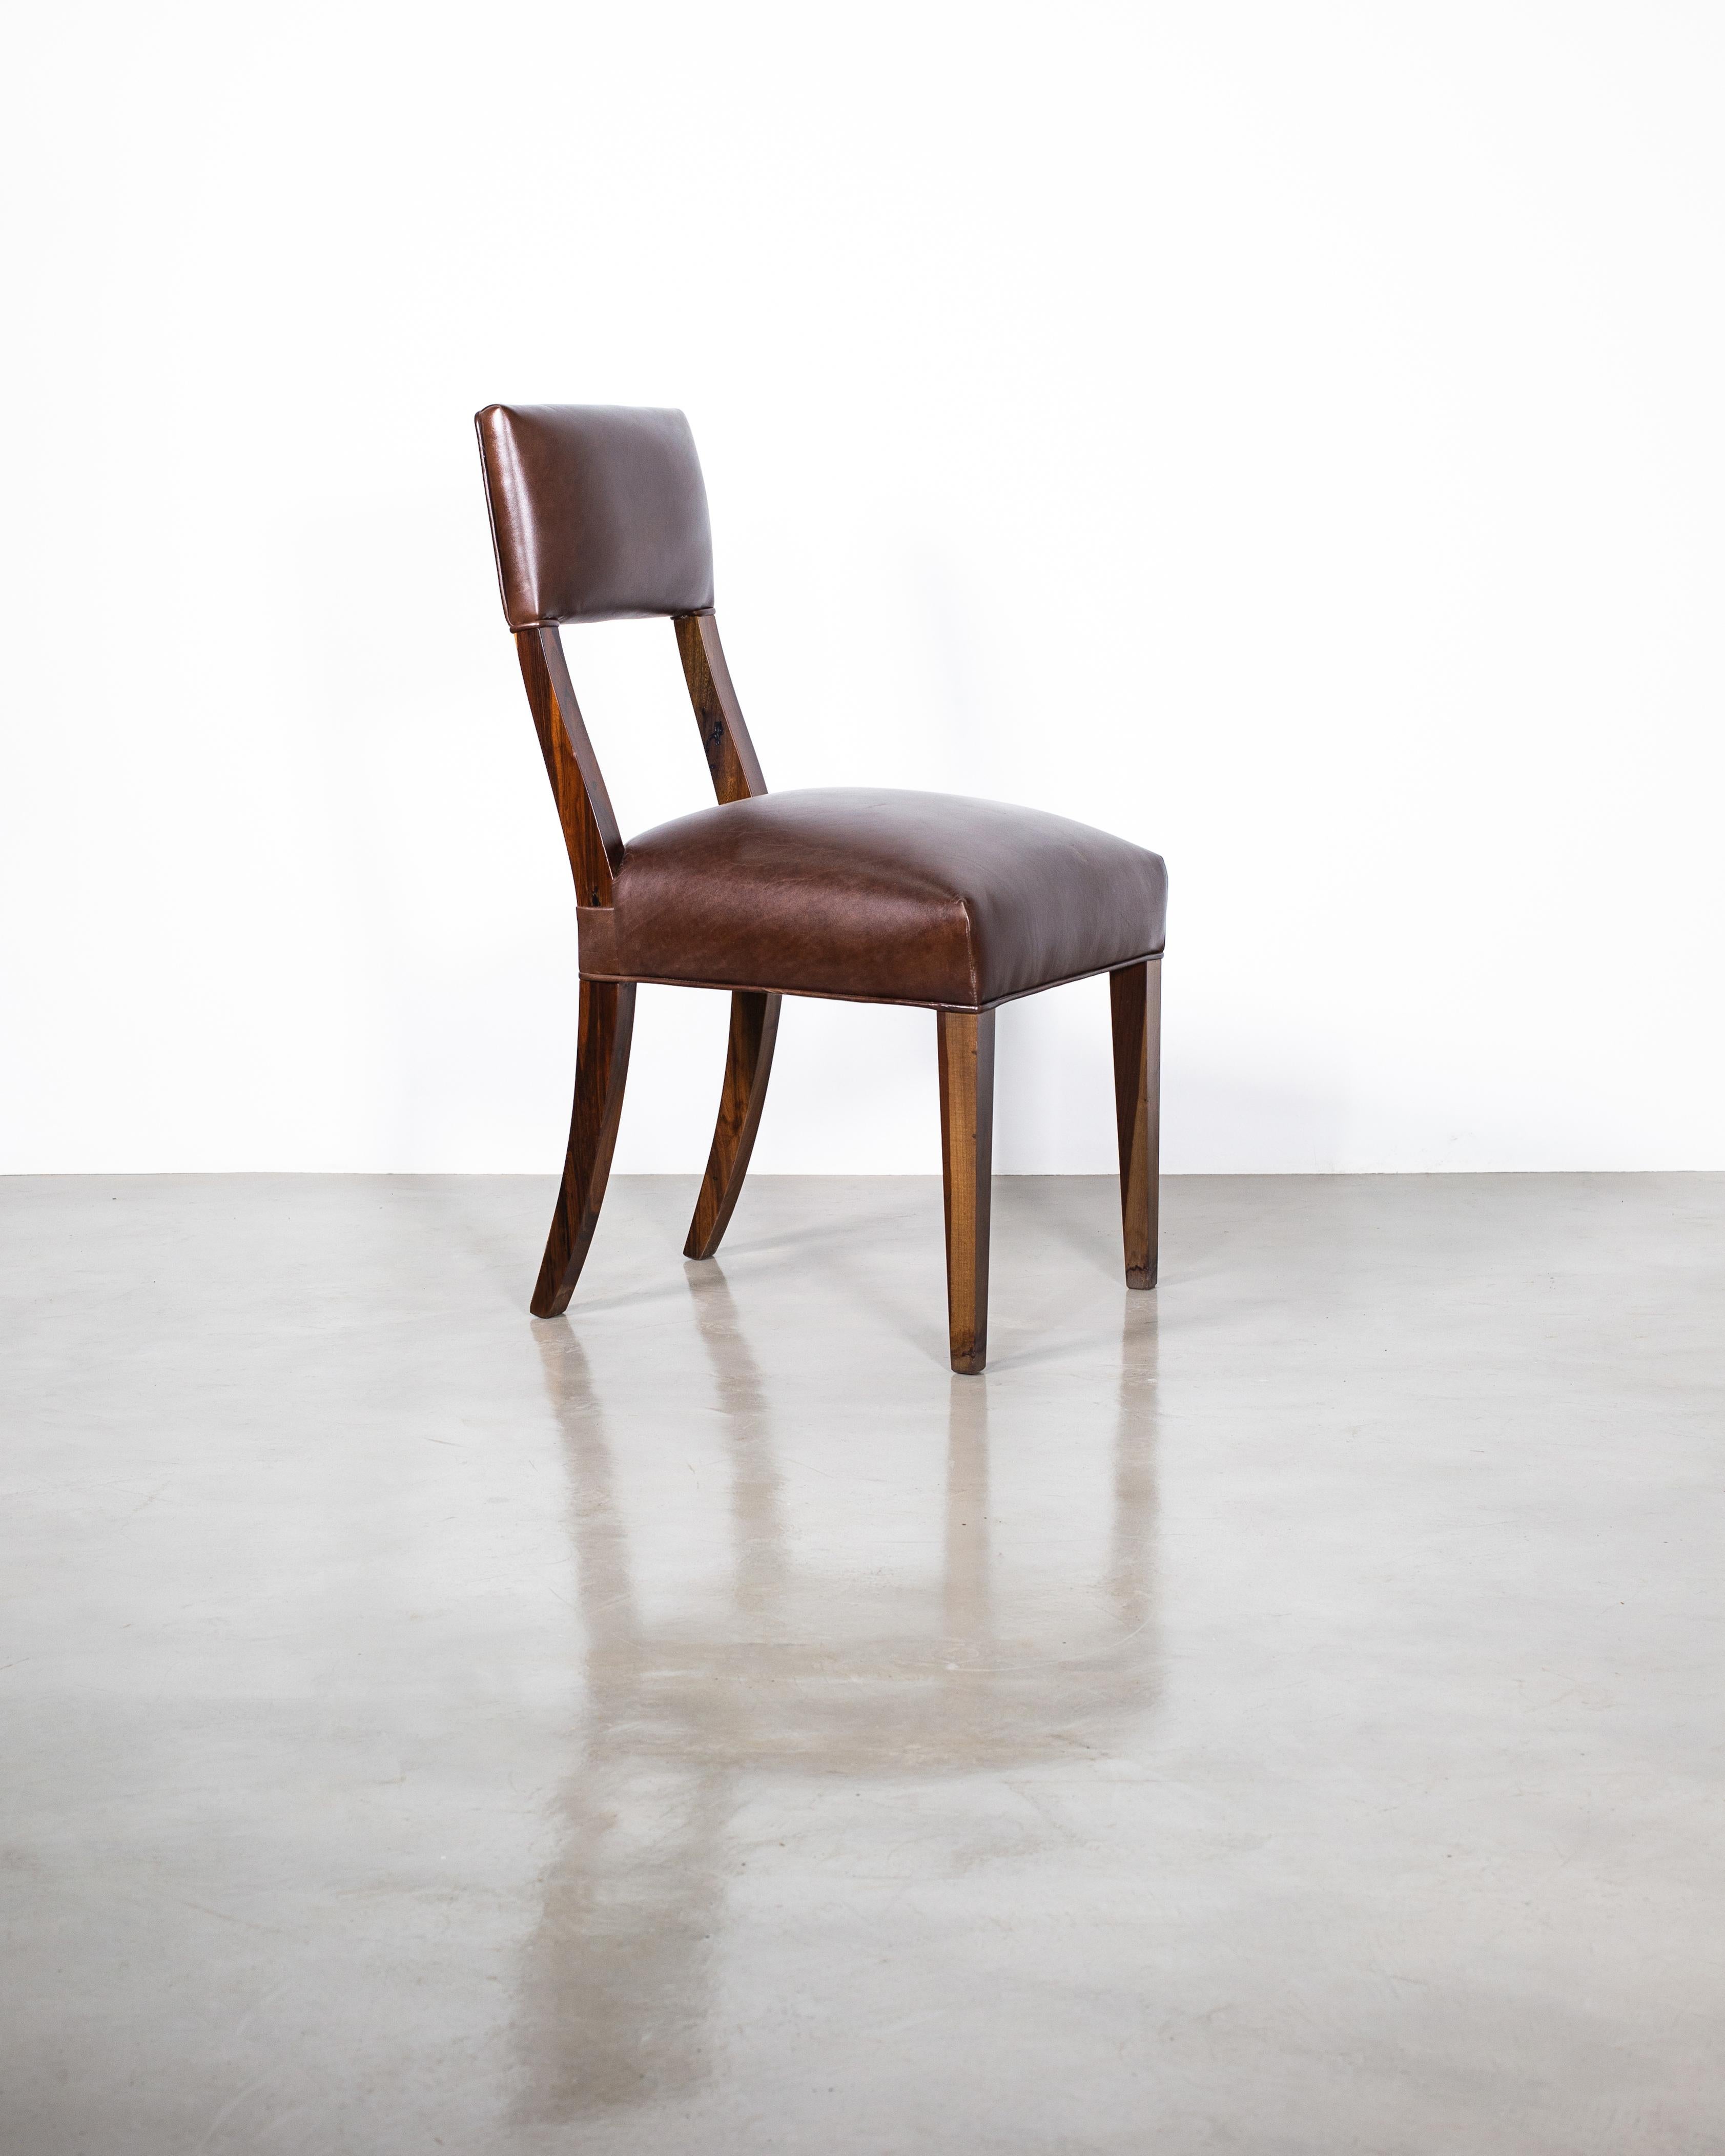 Costantini prides itself in using the hardest and most beautiful hardwoods in the construction of its line of seating. Shown in Argentine Rosewood and black leather, the Luca chair’s gently curved, high back exudes elegance and propriety.

Available